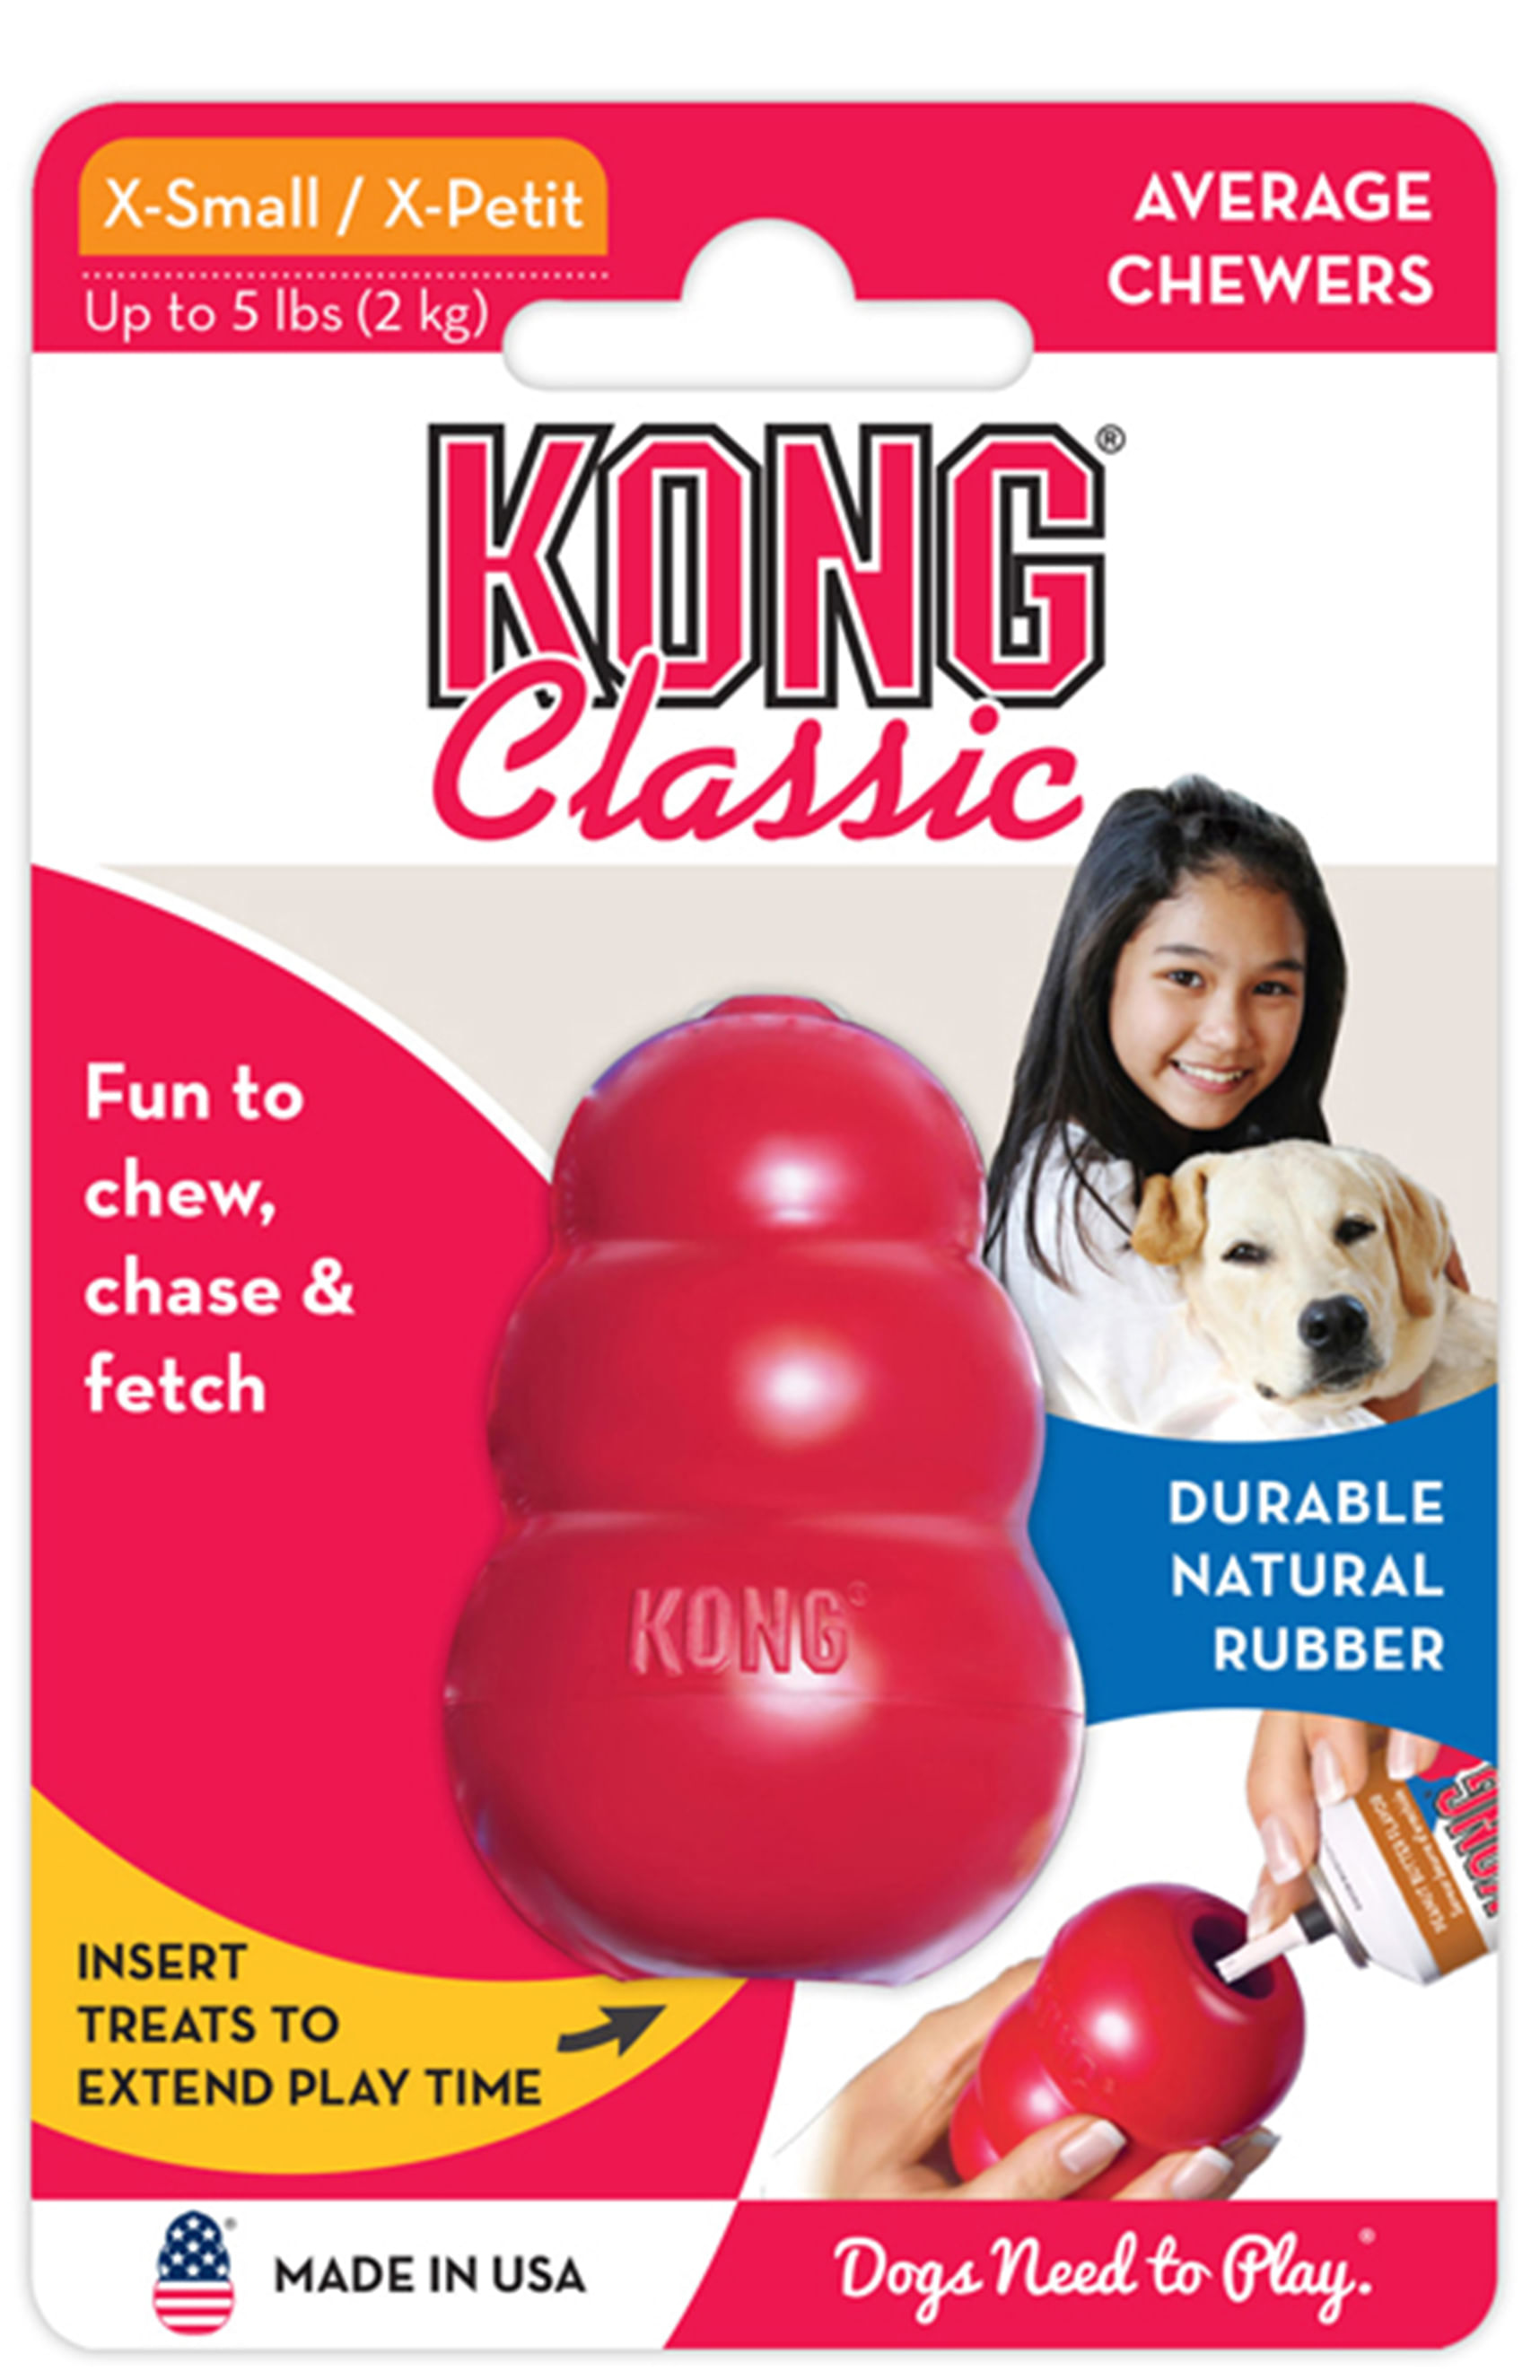 KONG - Classic Dog Toy, Durable Natural Rubber- Fun to Chew, Chase